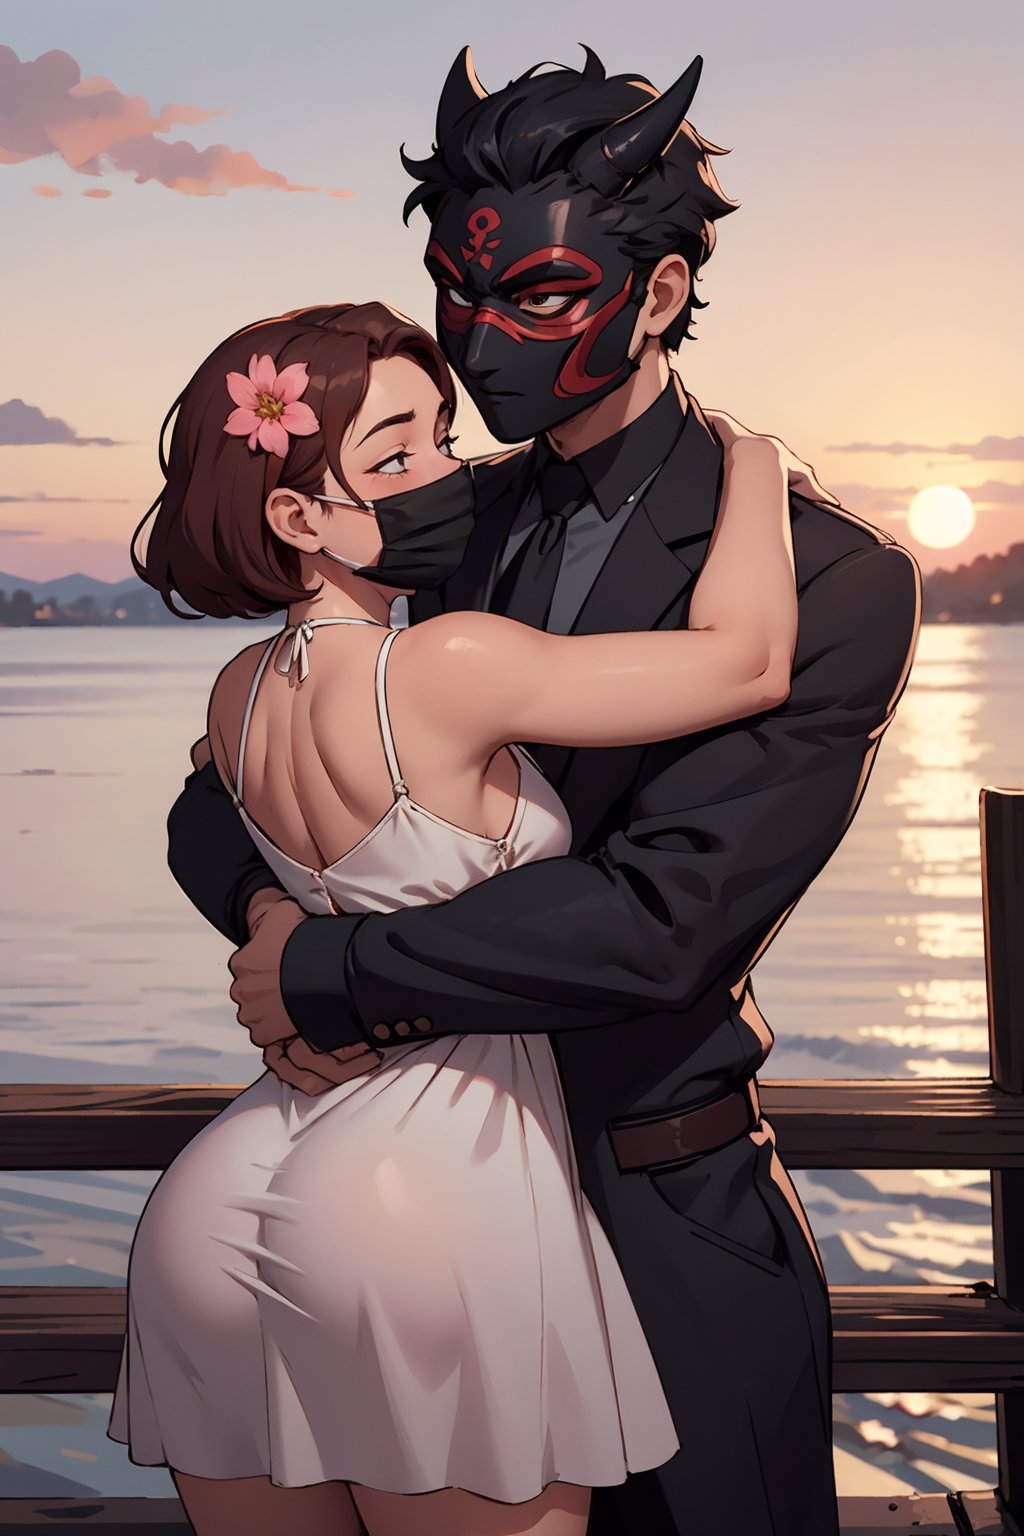 masterpiece, best quality, 1girl, boy, in love, huggin romantically, sunset, cherry blosom, she wears a sun dress, he wears a tuxido and an oni mask, extremely detailed